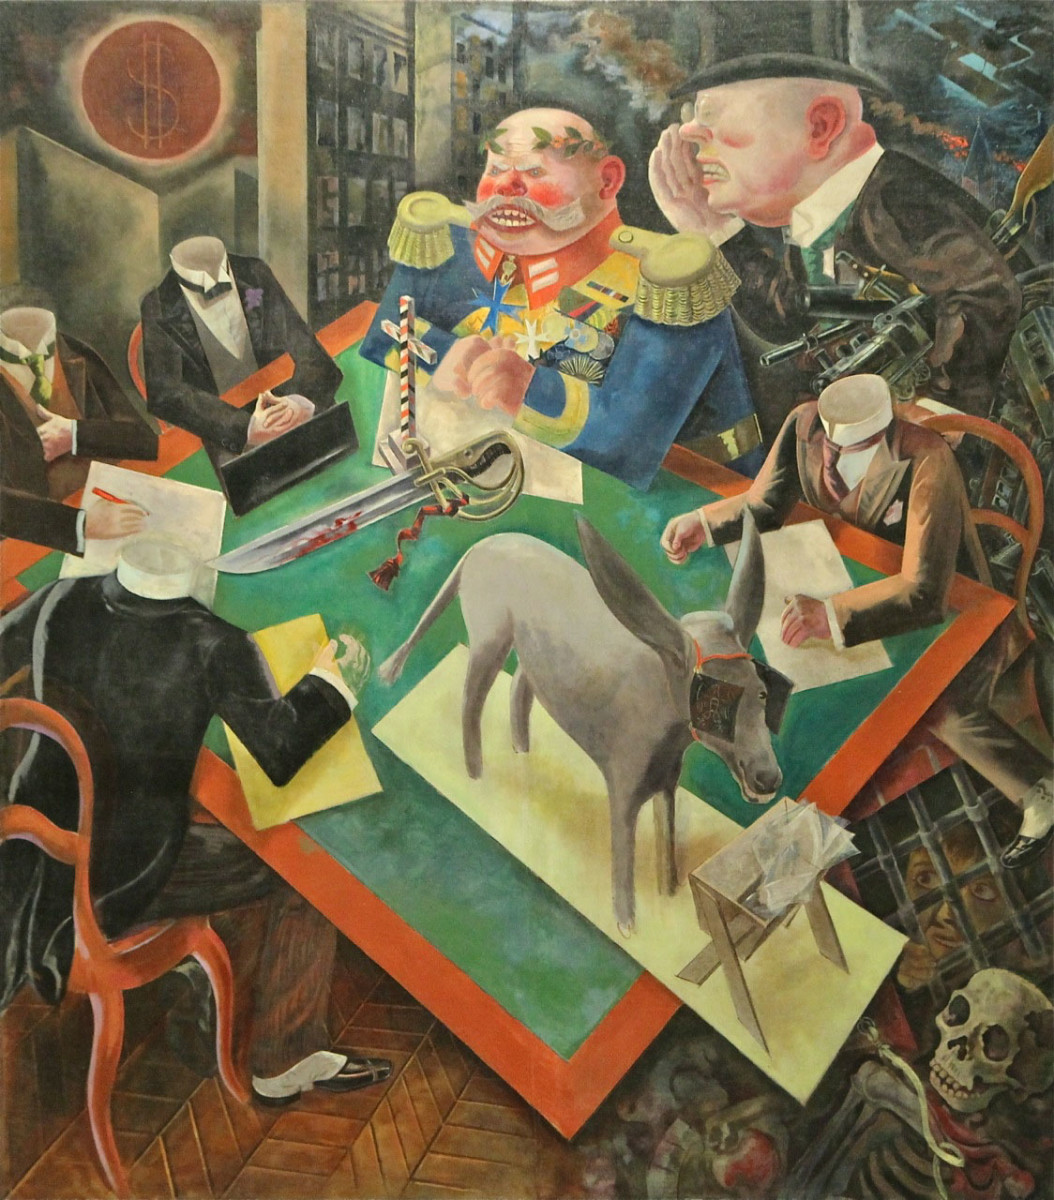 Eclipse of the Sun by George Grosz